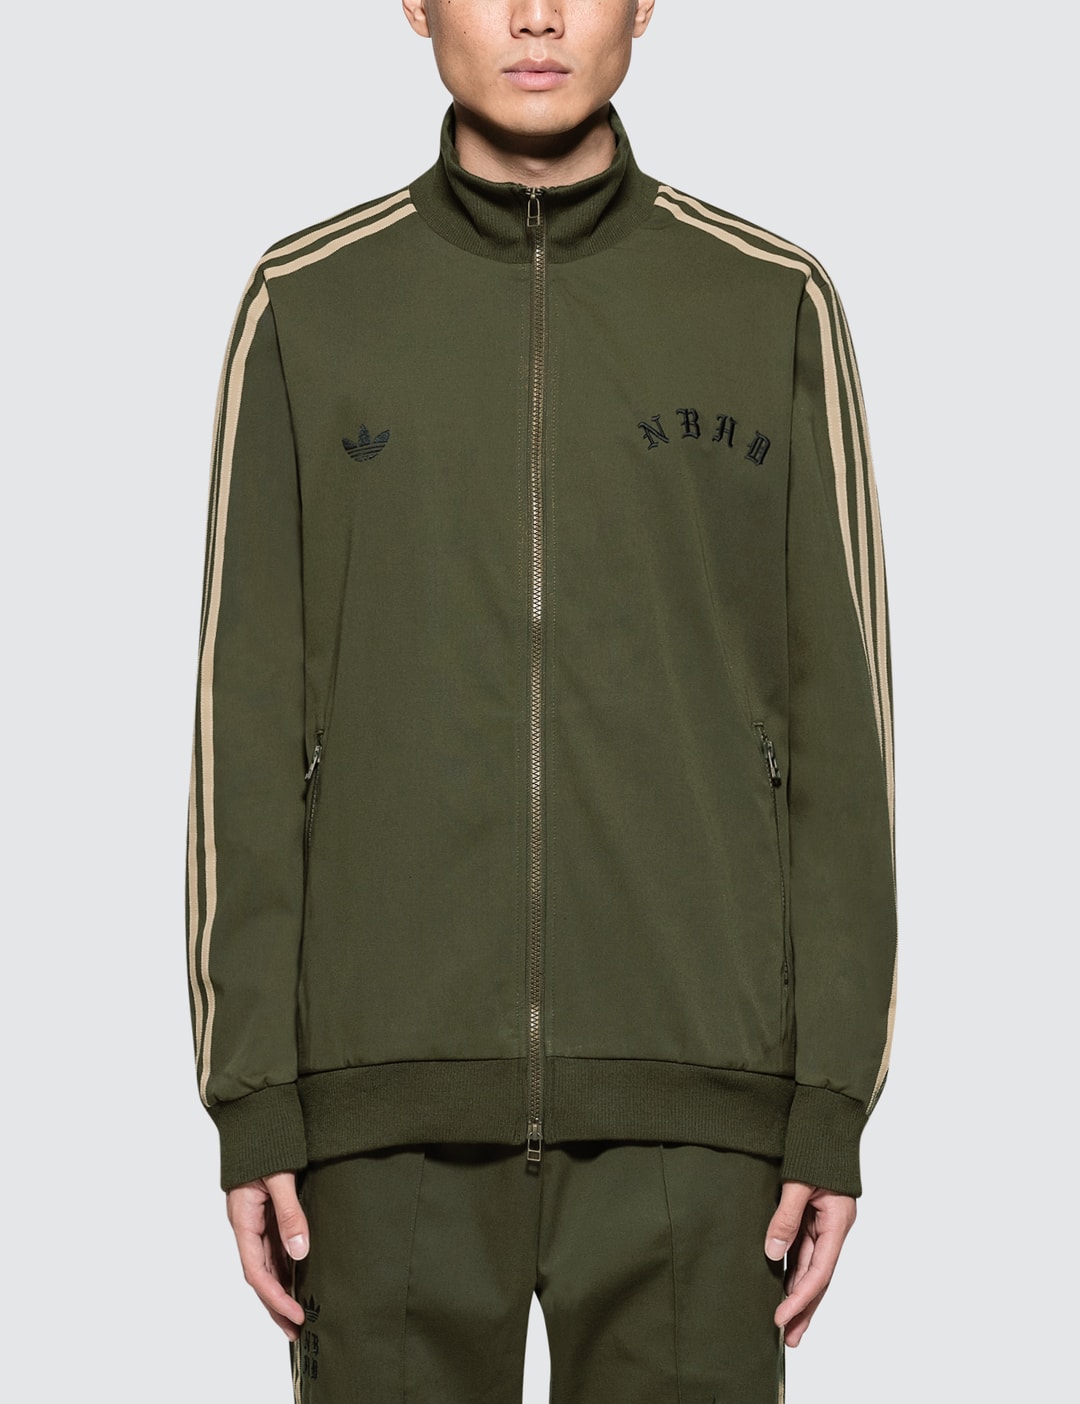 Adidas Originals - Neighborhood x Adidas NH Track Jacket | - Globally Curated Fashion and Lifestyle by Hypebeast